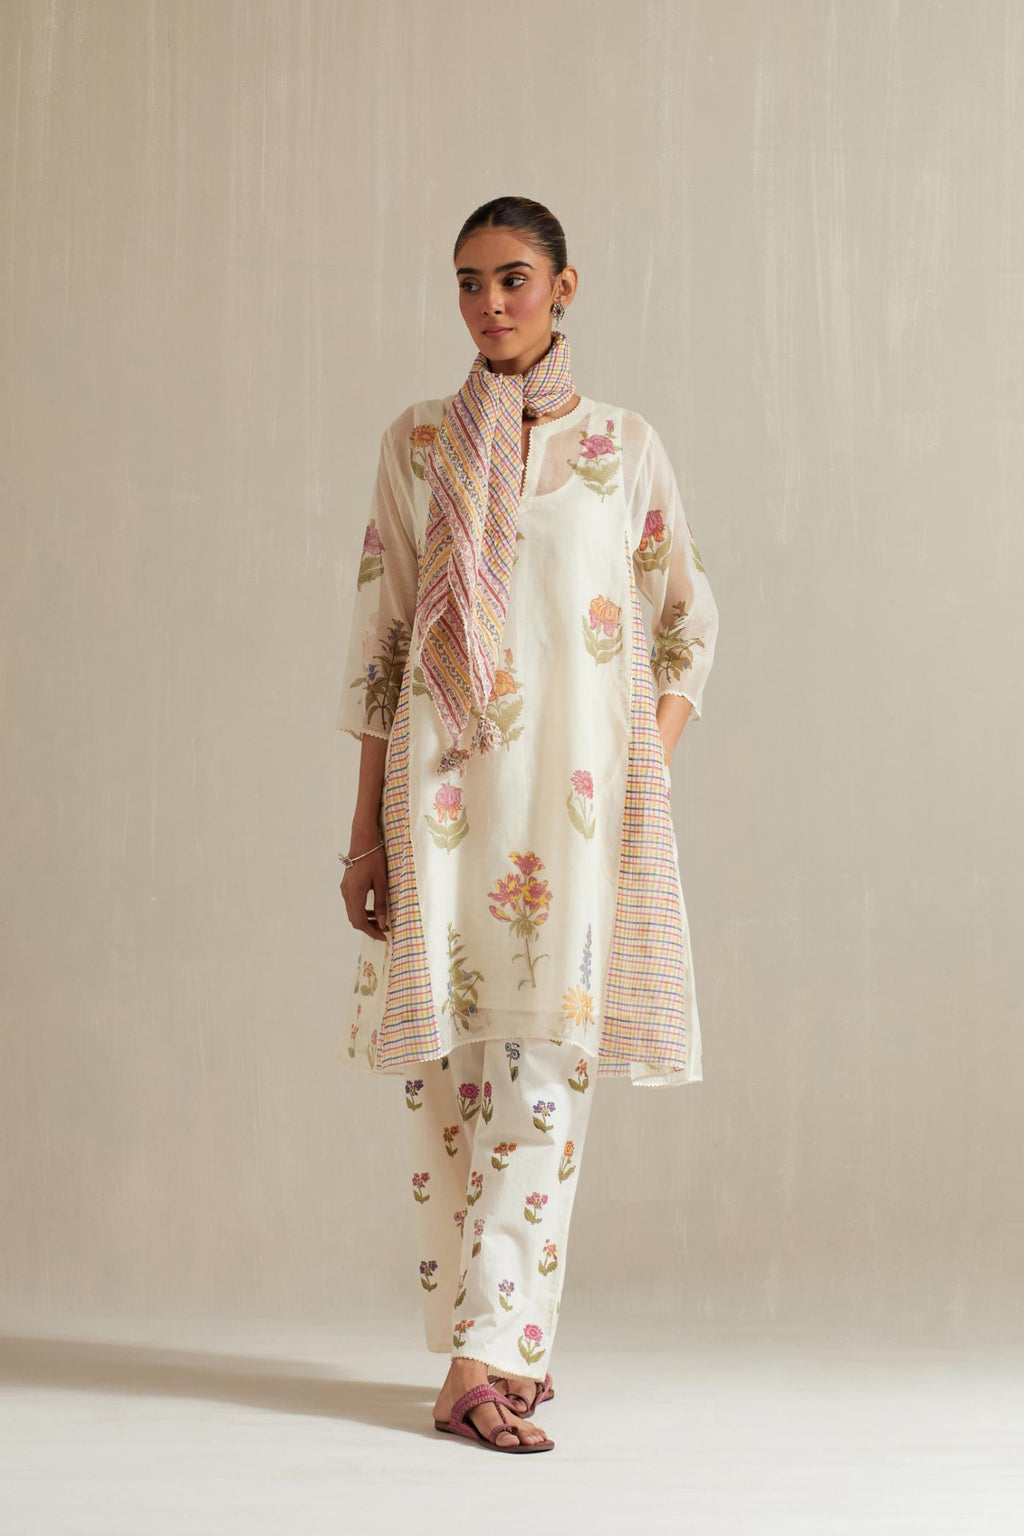 Off white hand block printed cotton chanderi short kalidar kurta set with all-over multi colored flower.